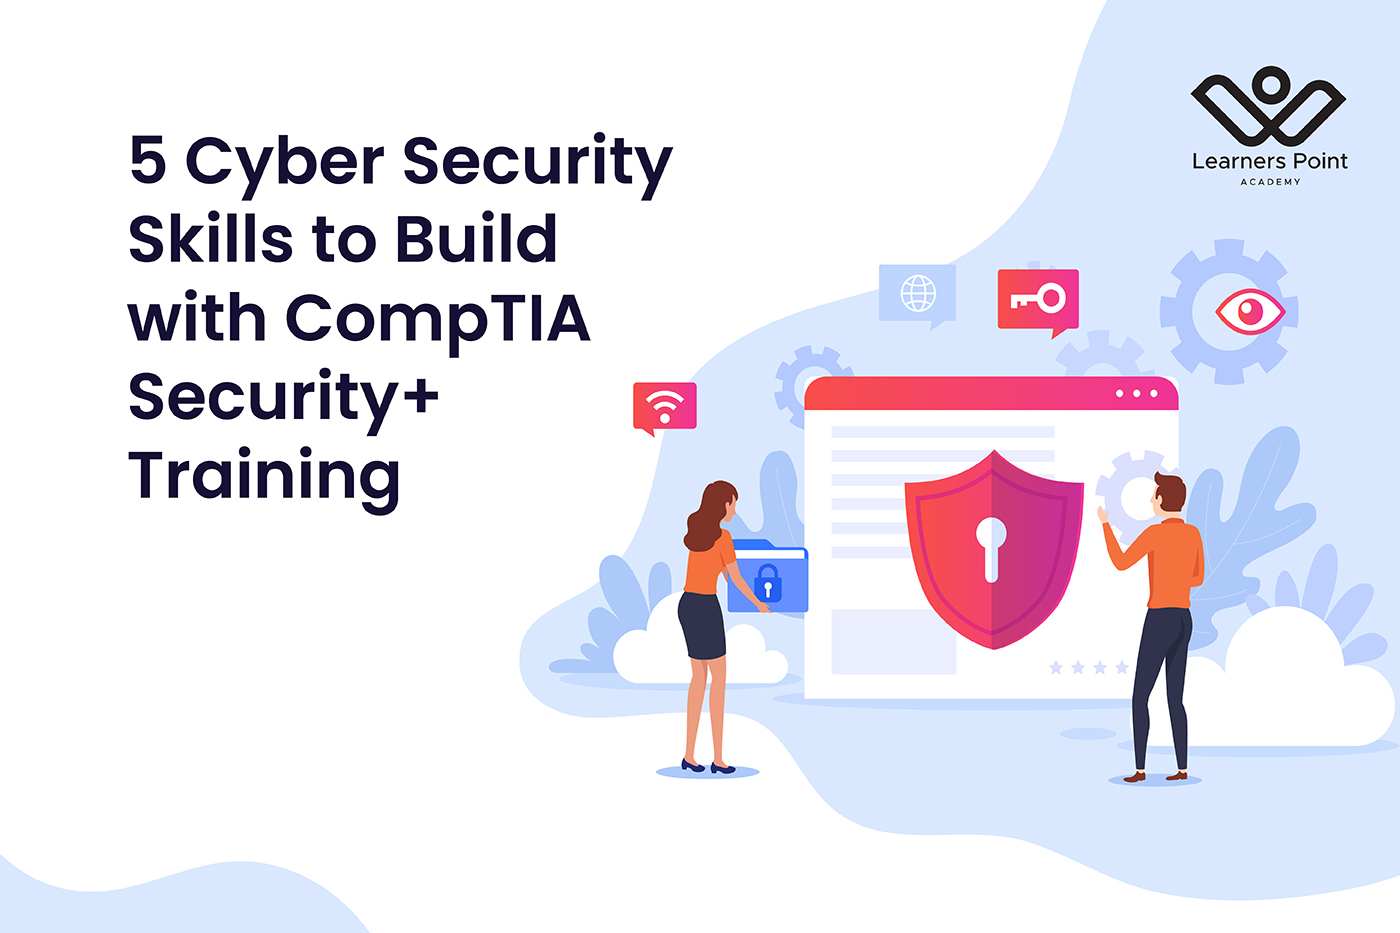 5 Cyber Security Skills to Build with CompTIA Security+ Training